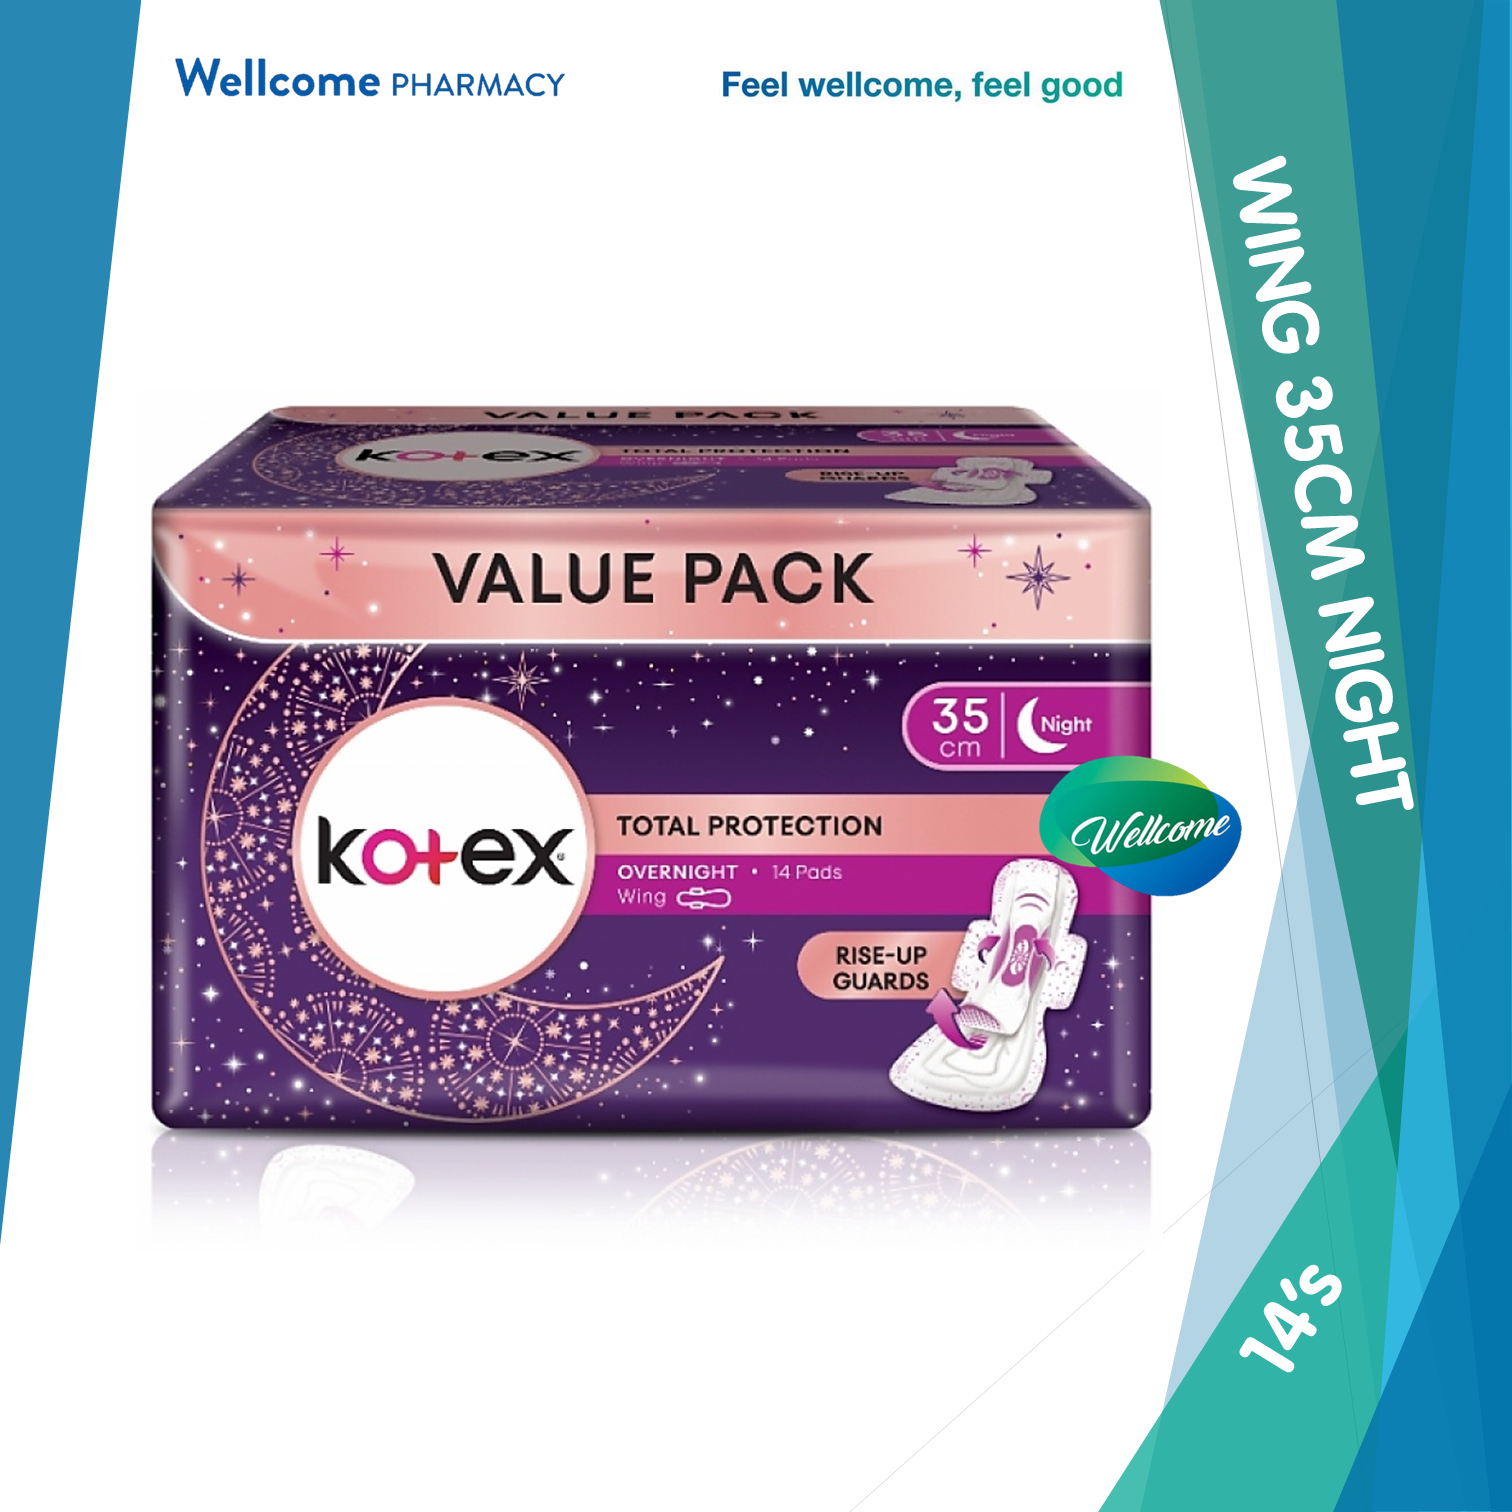 Kotex Total Protection Overnight PAG 35cm - 14s.png